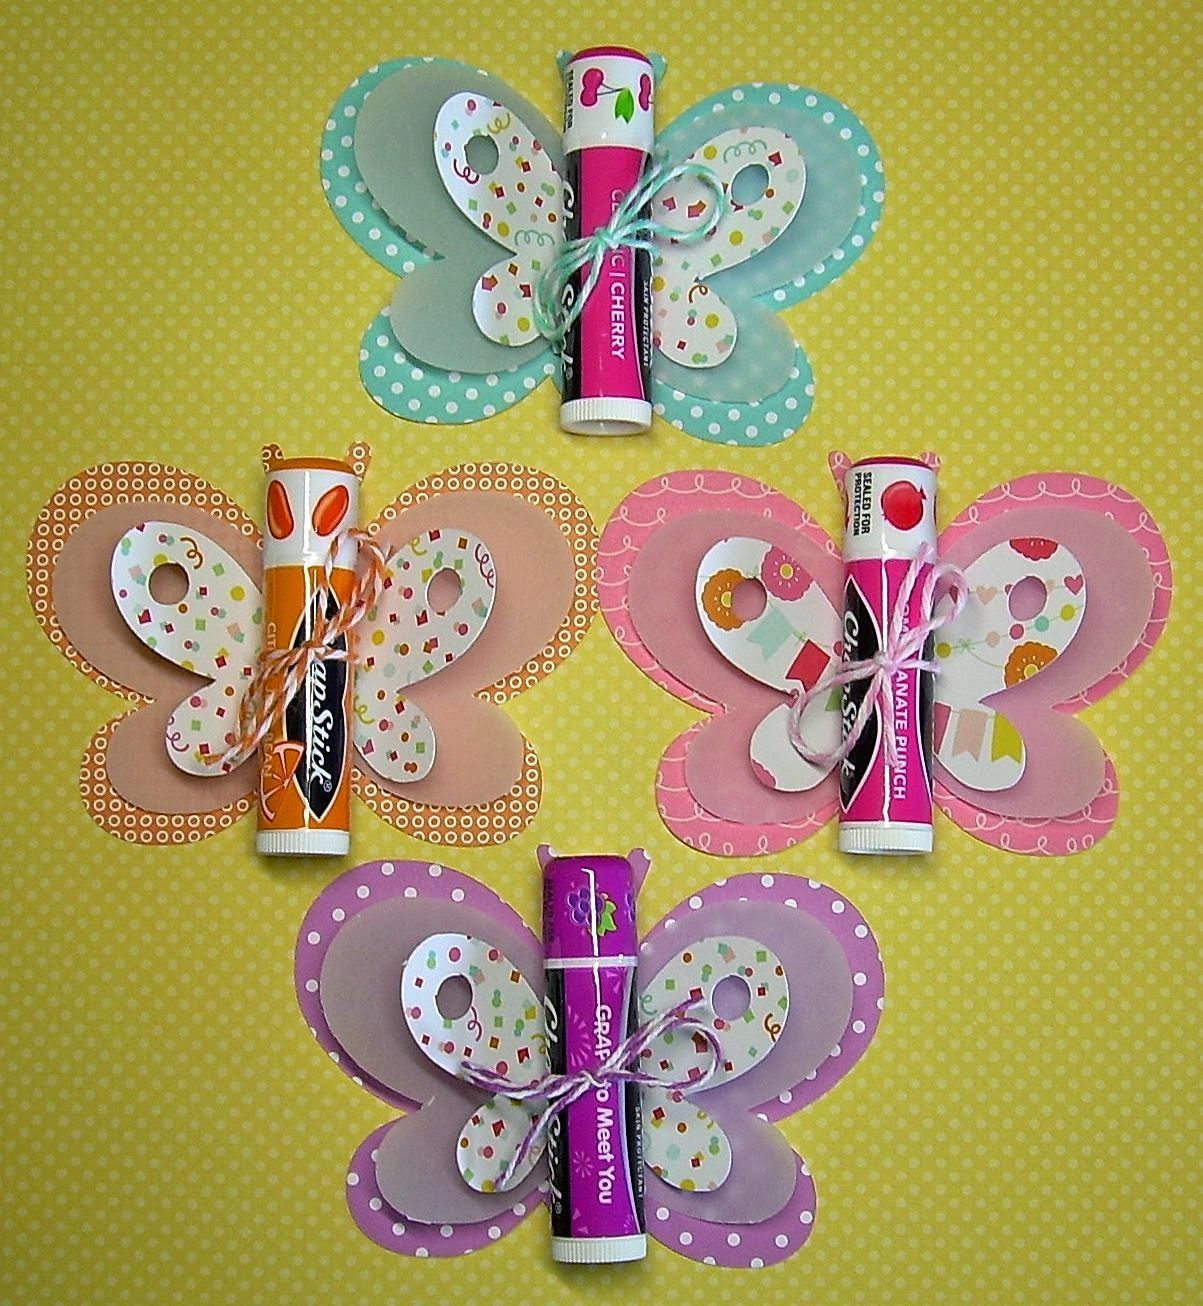 Chapstick Butterflies! what a cute idea for a little girls party and many other occasions.